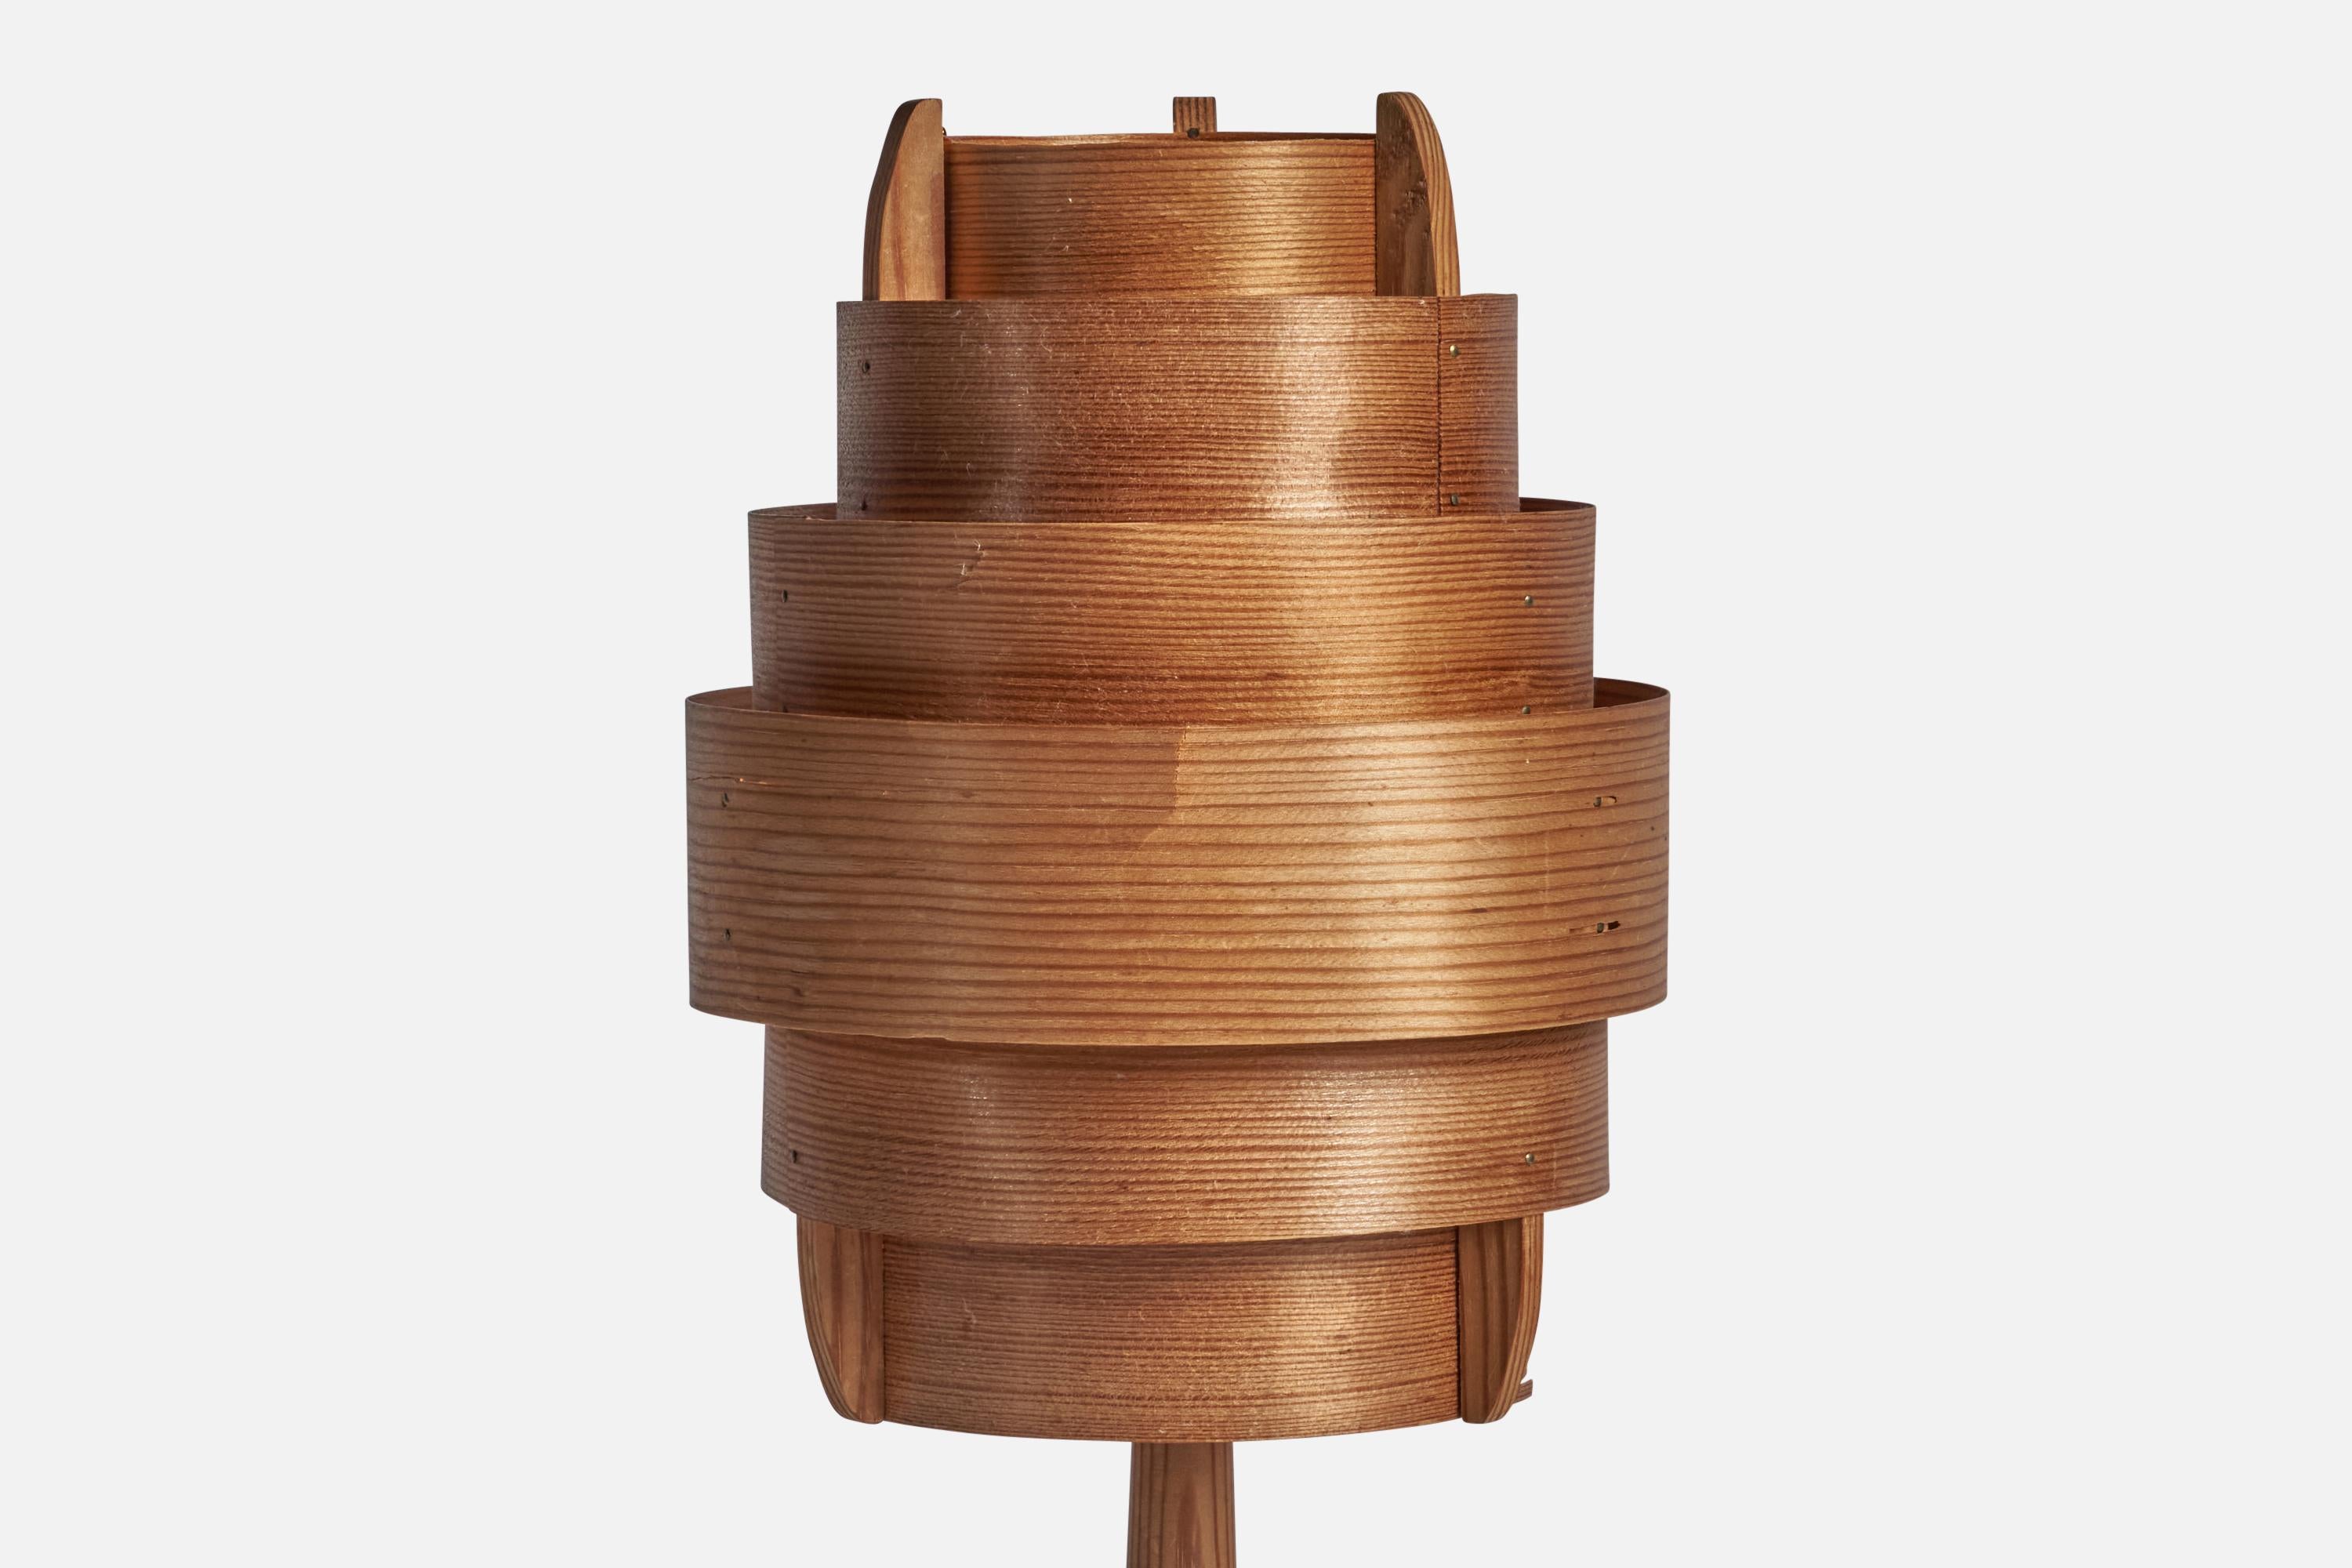 A pine and moulded pine-veneer table lamp, designed and produced by Hans-Agne Jakobsson, Markaryd, Sweden, 1970s.

Overall Dimensions (inches): 16.25